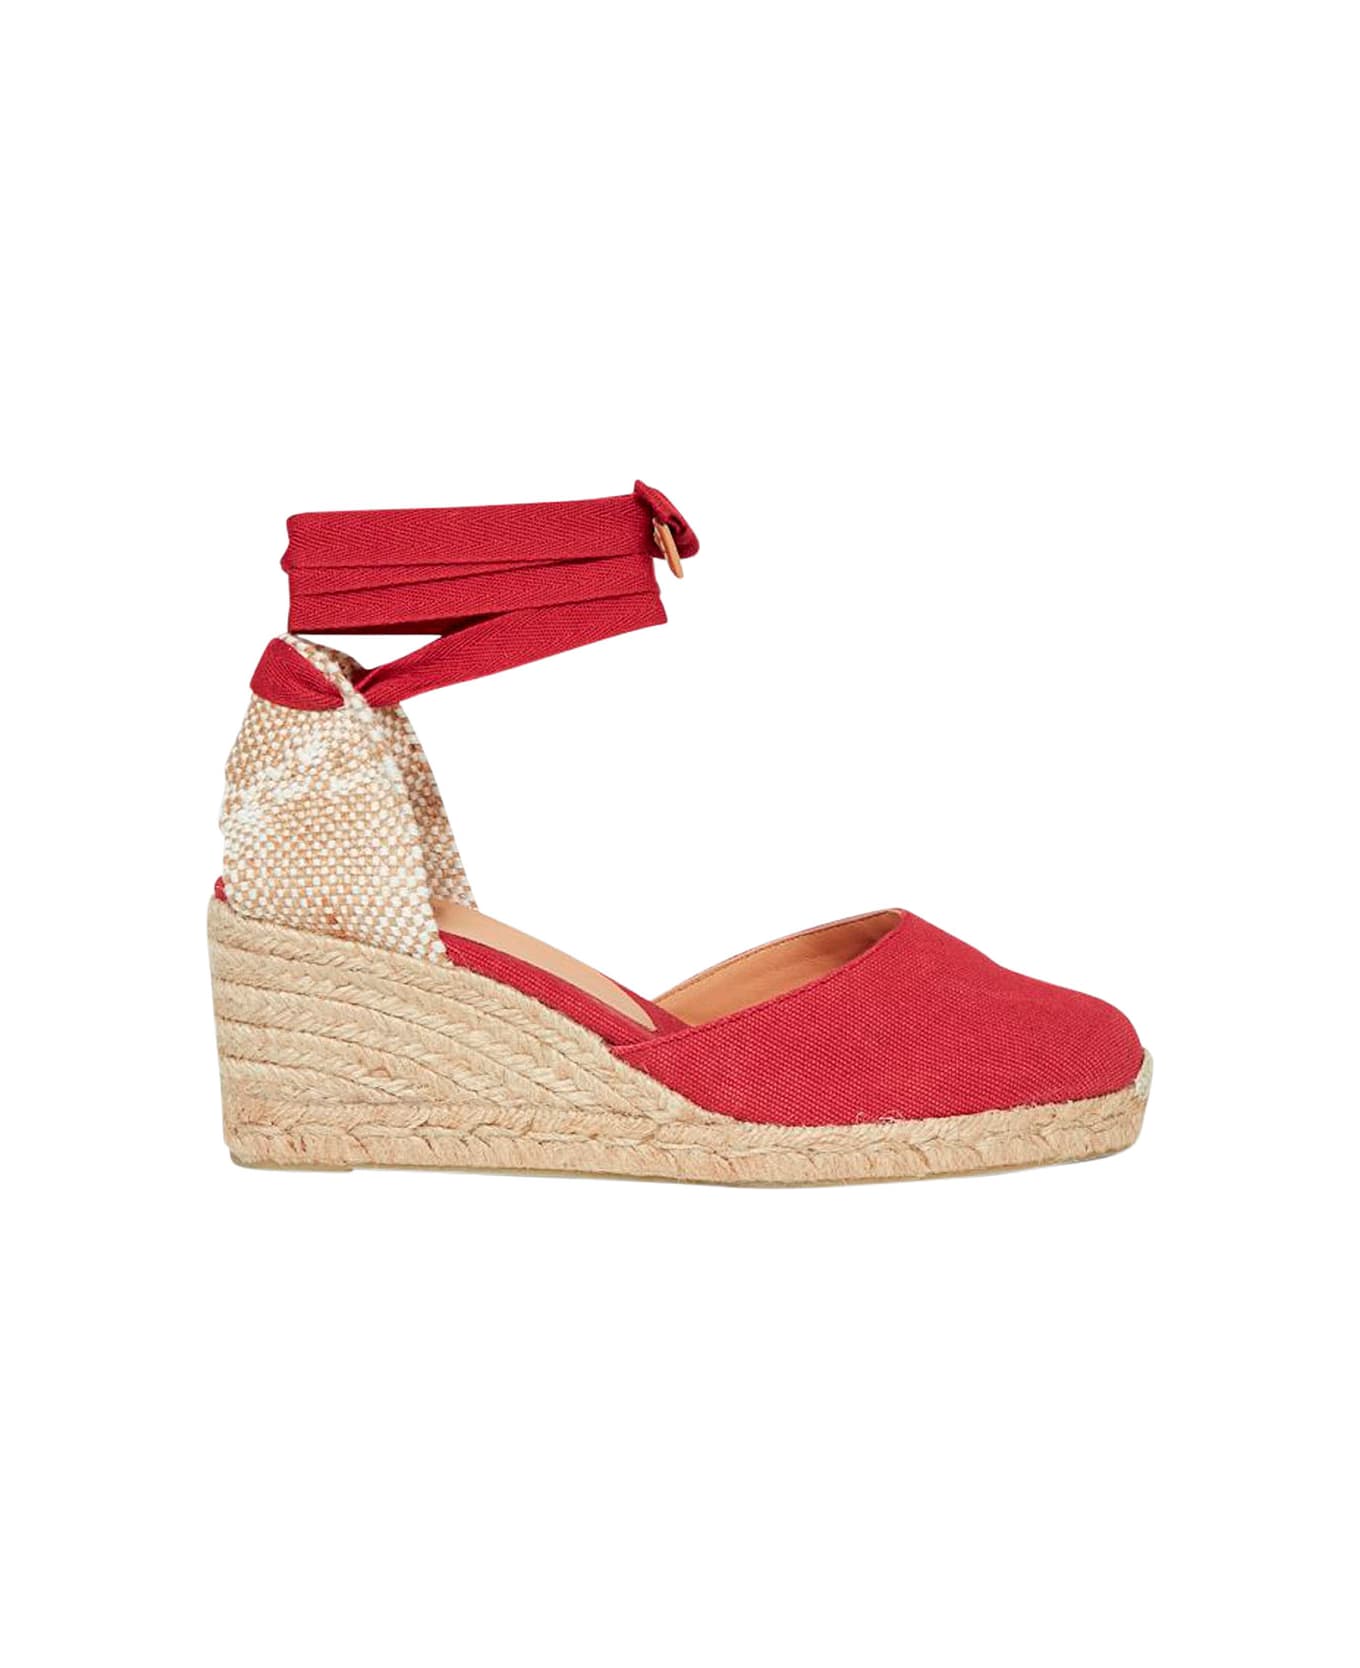 Castañer Red Espadrillas With Wedge Heel In Cotton Woman - Red